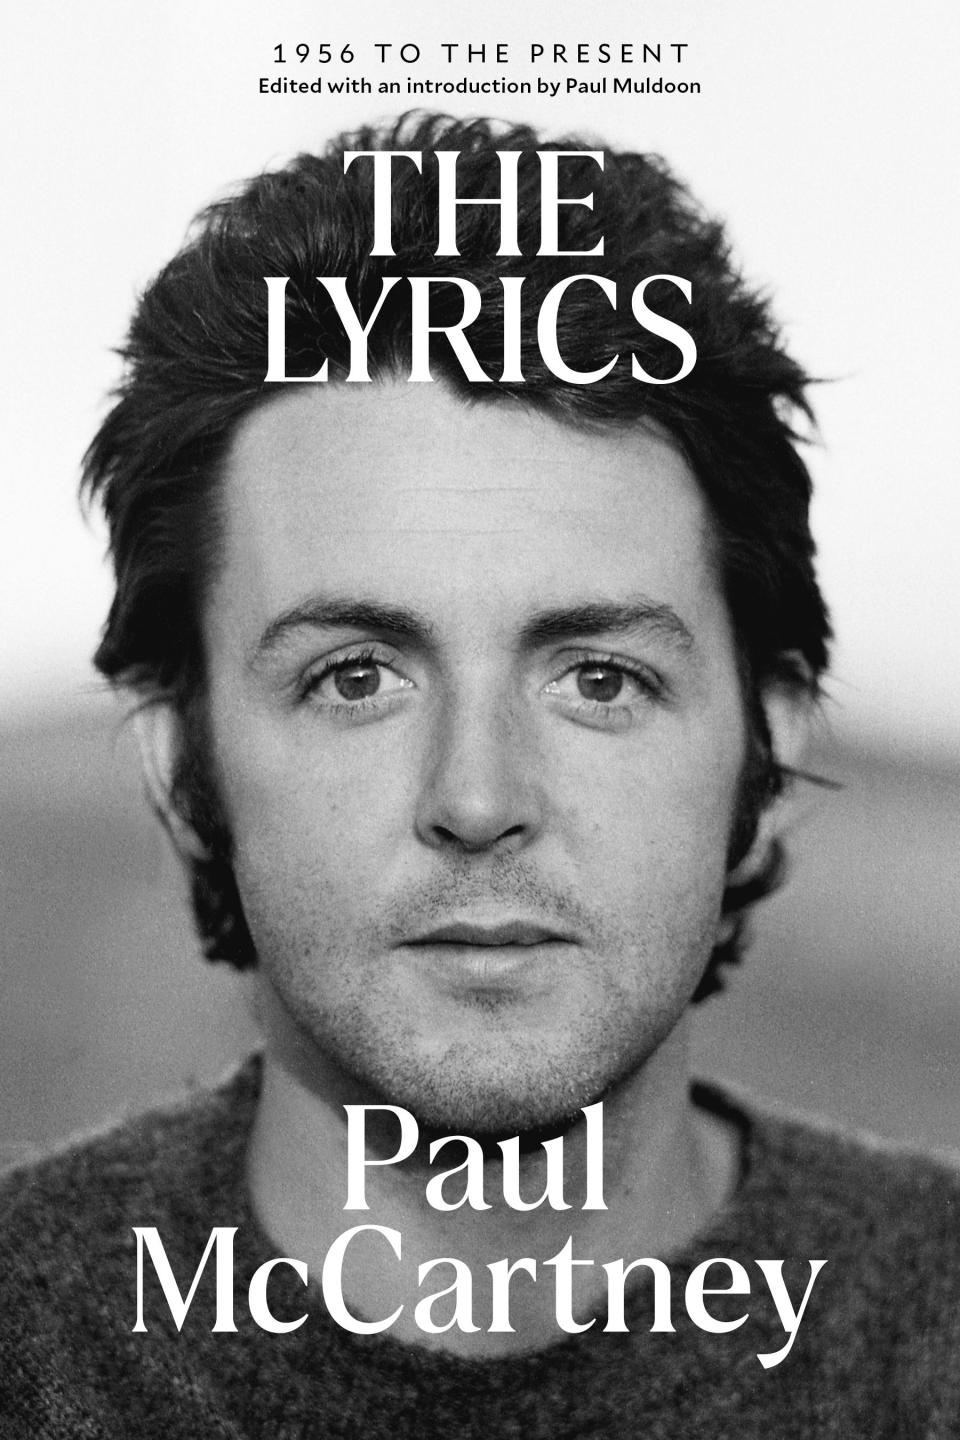 Paul McCartney's best-selling book "The Lyrics" is now available in paperback.